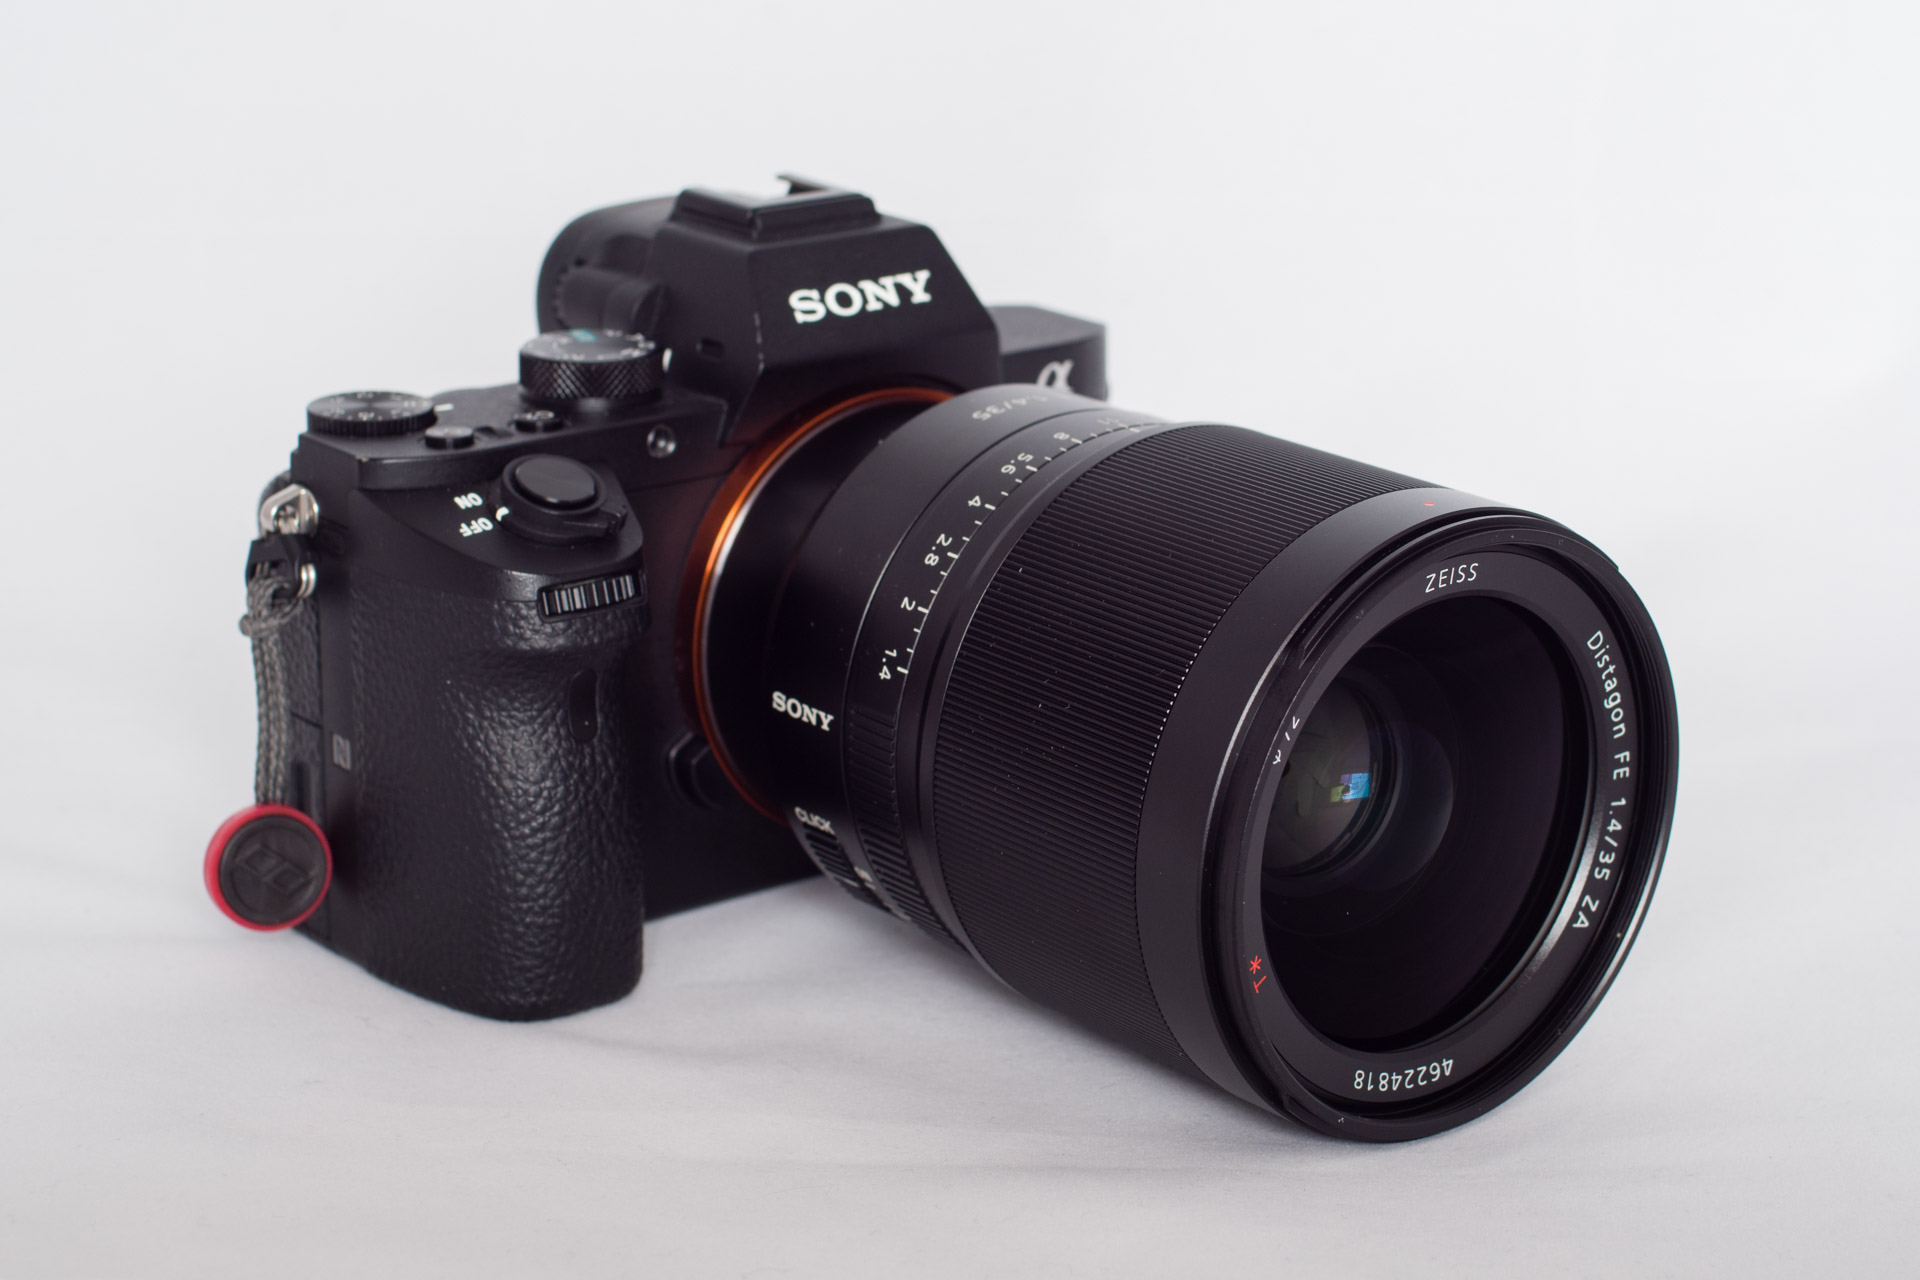 The Sony Zeiss Distagon T* FE 35mm f/1.4 ZA Lens Review — Tools Toys